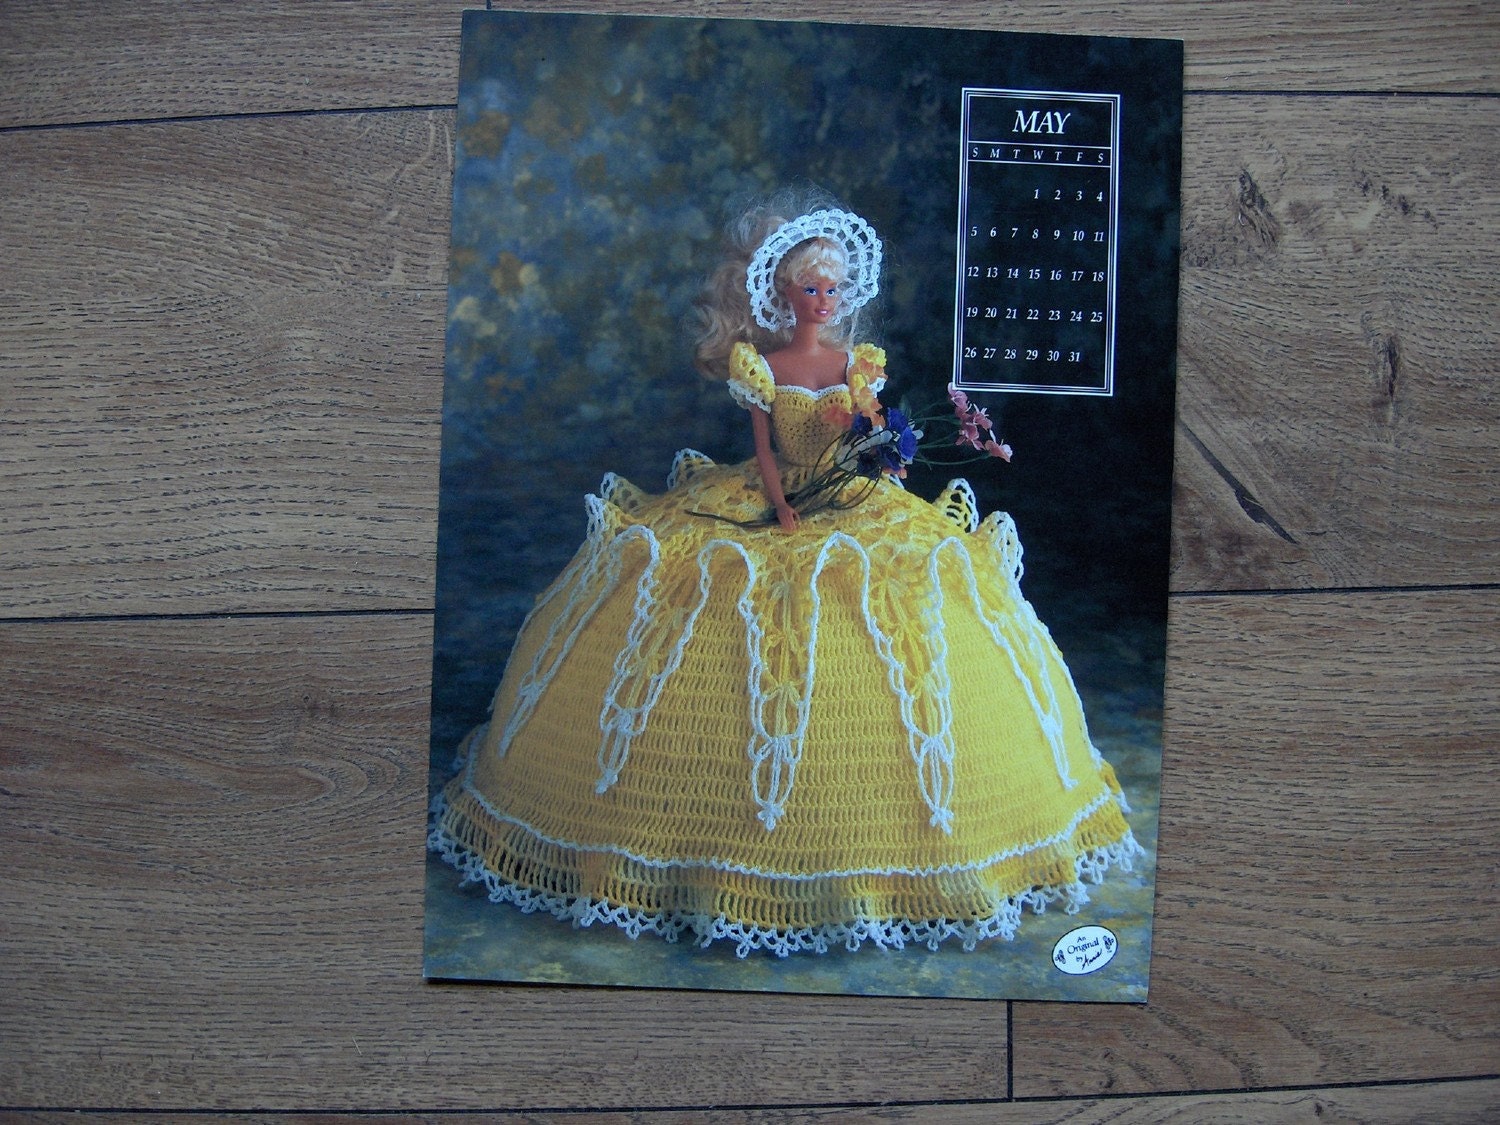 Doll Clothes Patterns вЂ” Doll Diaries